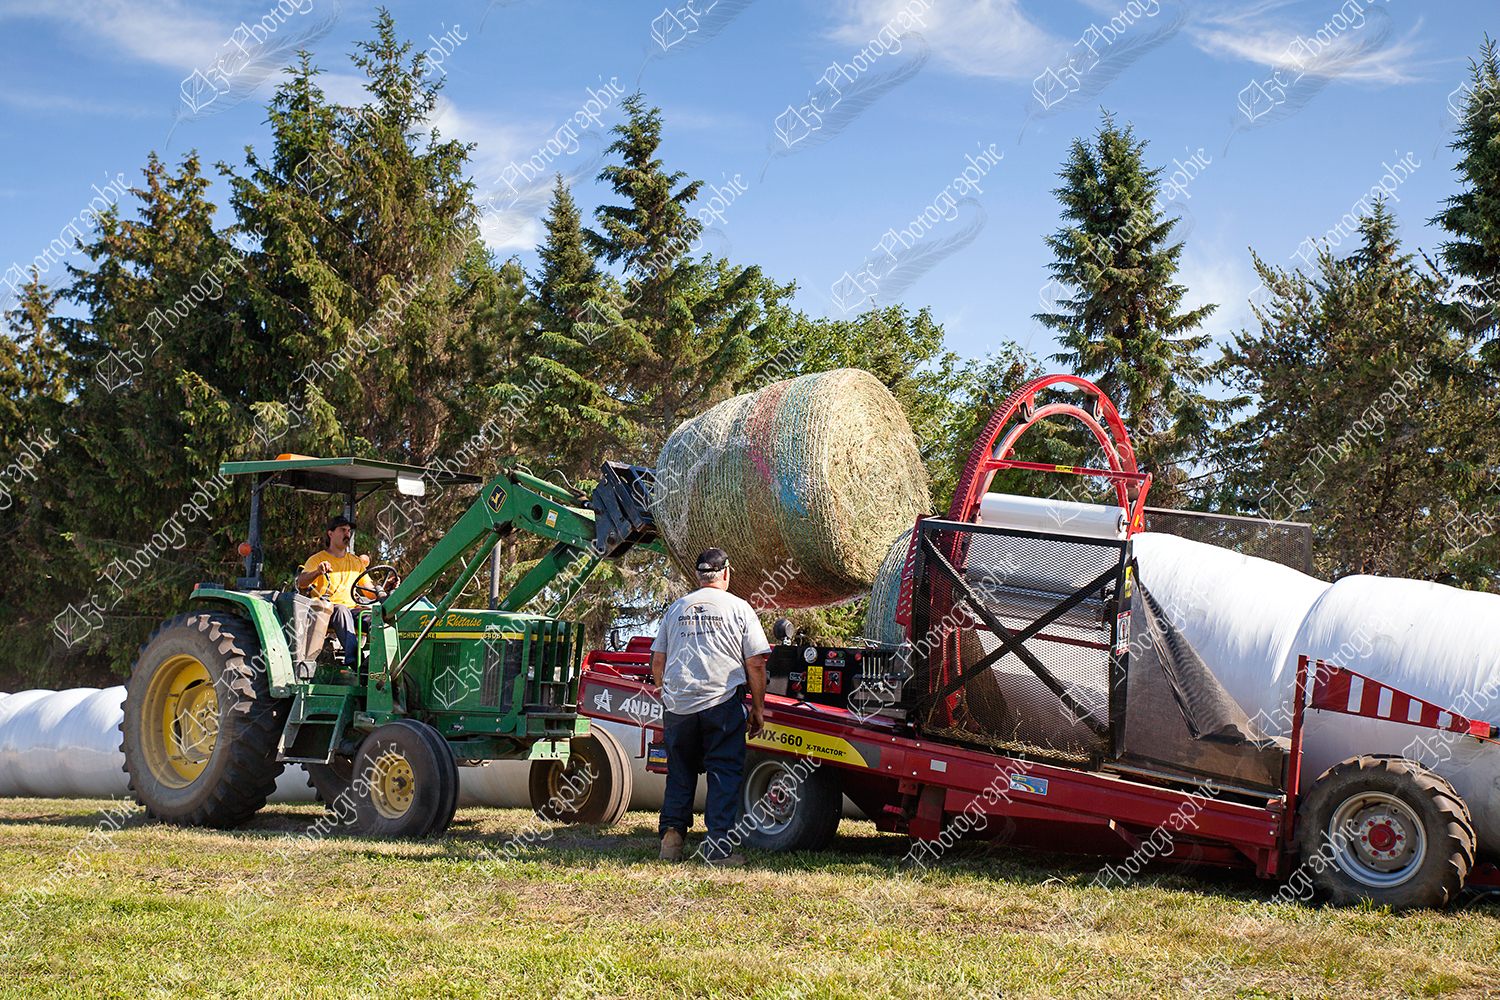 elze_photo_9305_machinerie_agricole_foin_anderson_hay